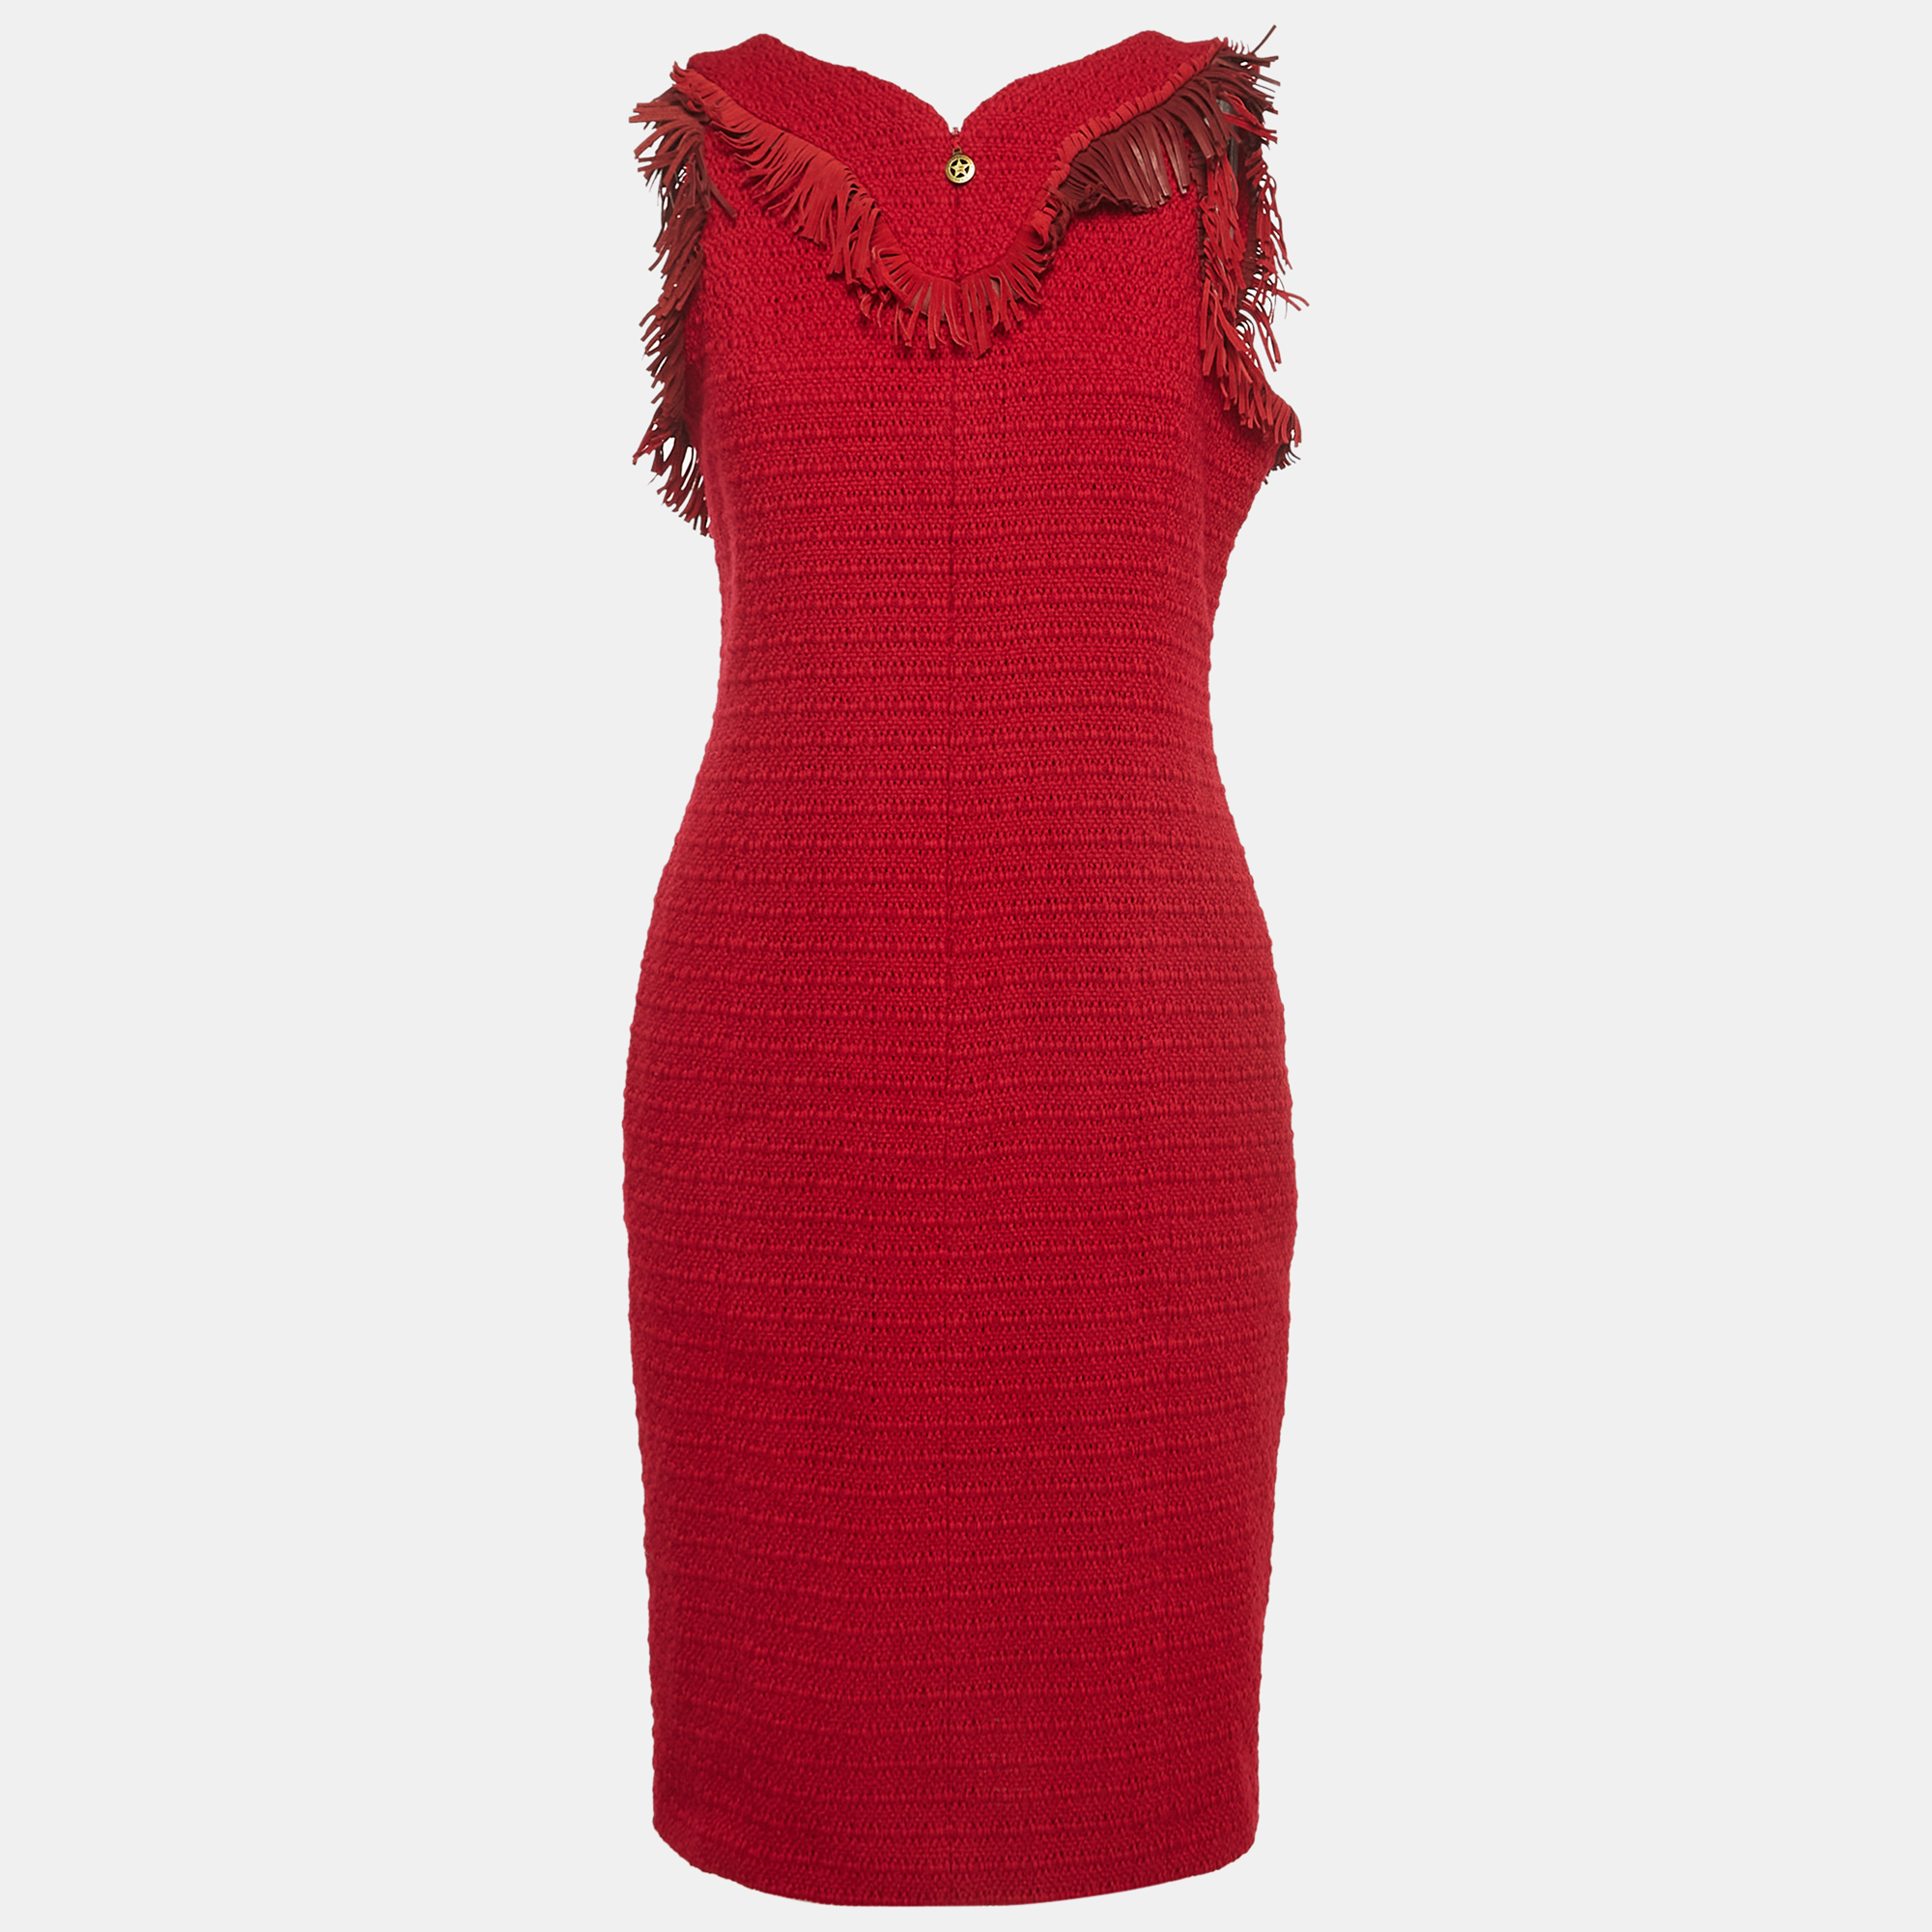 Chanel Red Suede Fringed Tweed Sleeveless Short Dress L